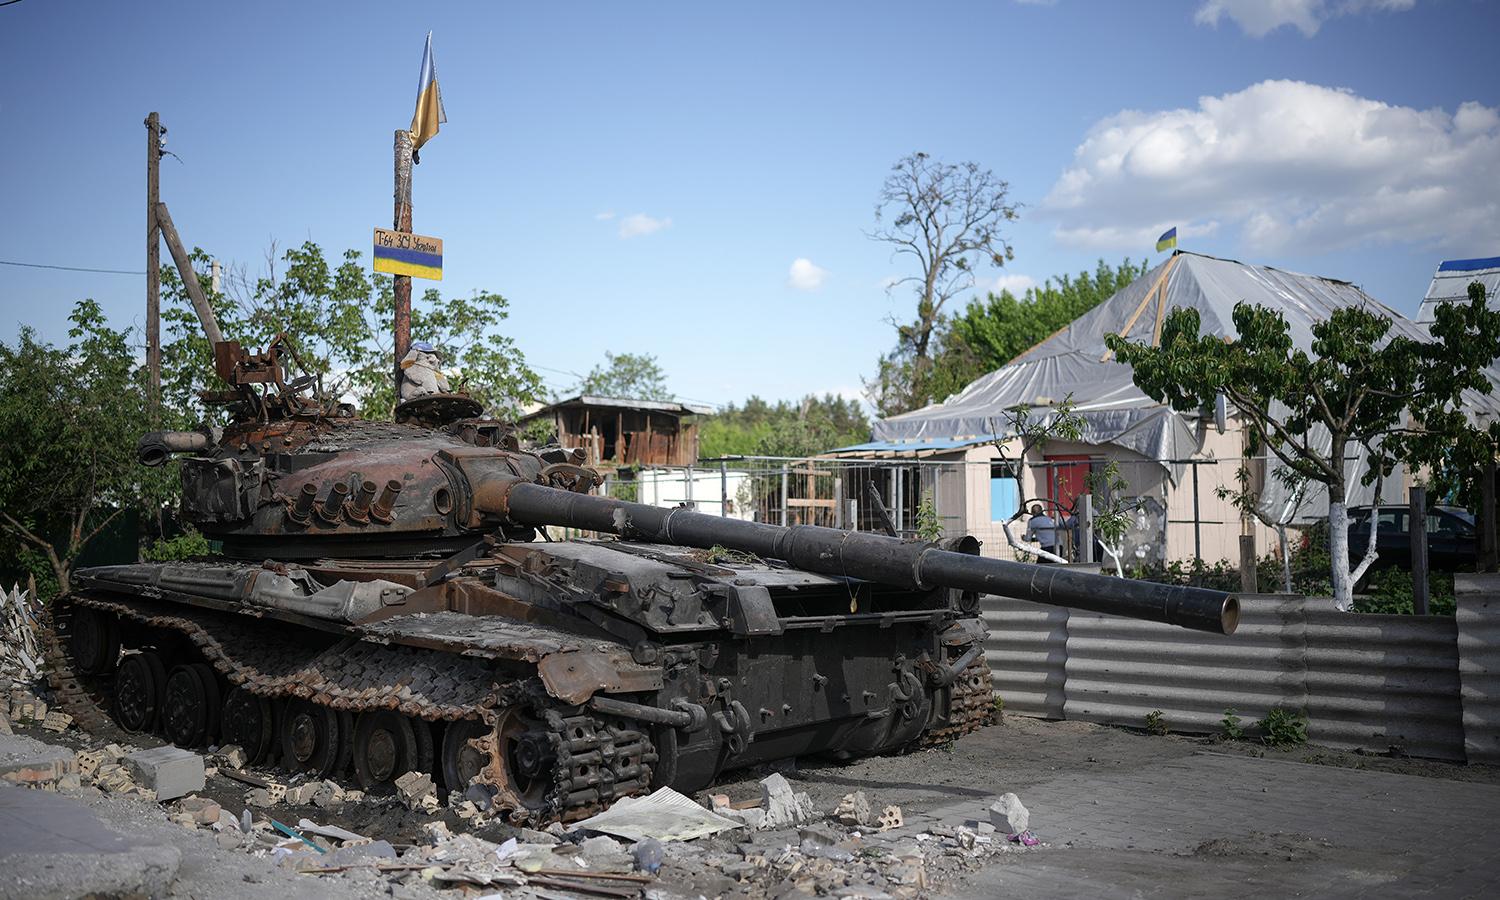 A child&#8217;s toy sits on top of a destroyed Russian tank on May 24, 2022, in Hostomel, Ukraine. (Photo by Christopher Furlong/Getty Images)